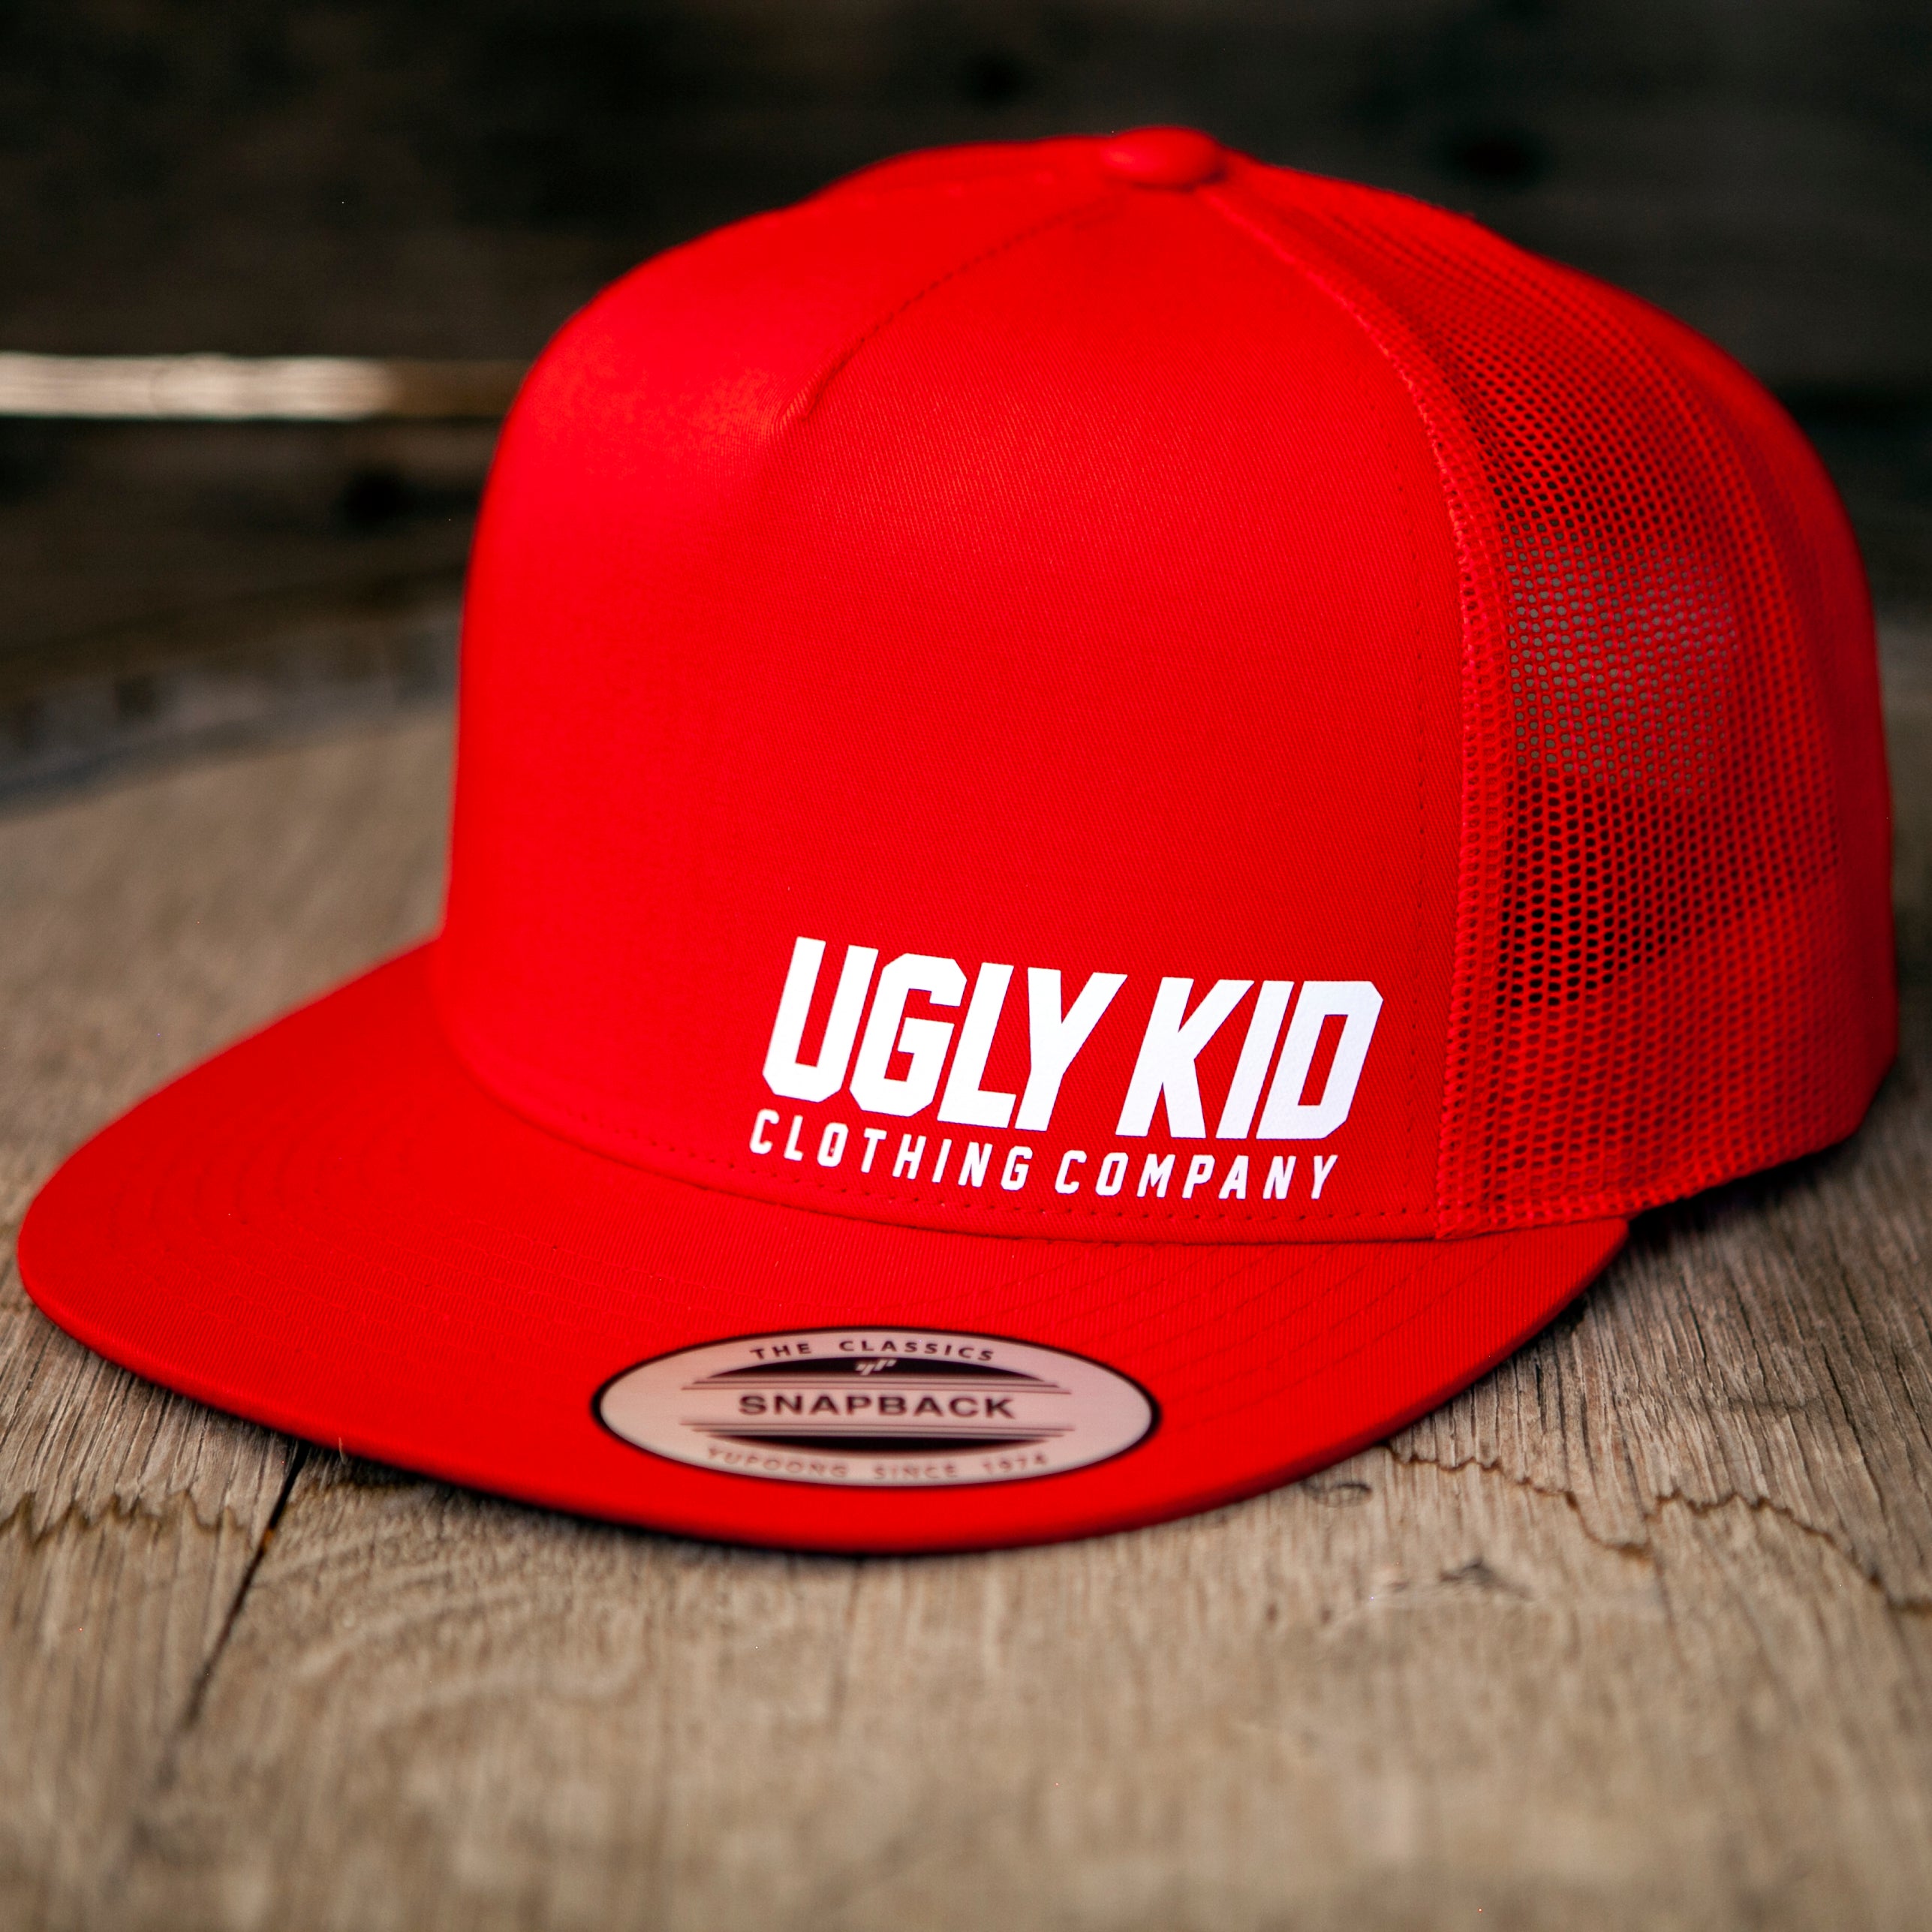 Ugly Kid Clothing Company Hat